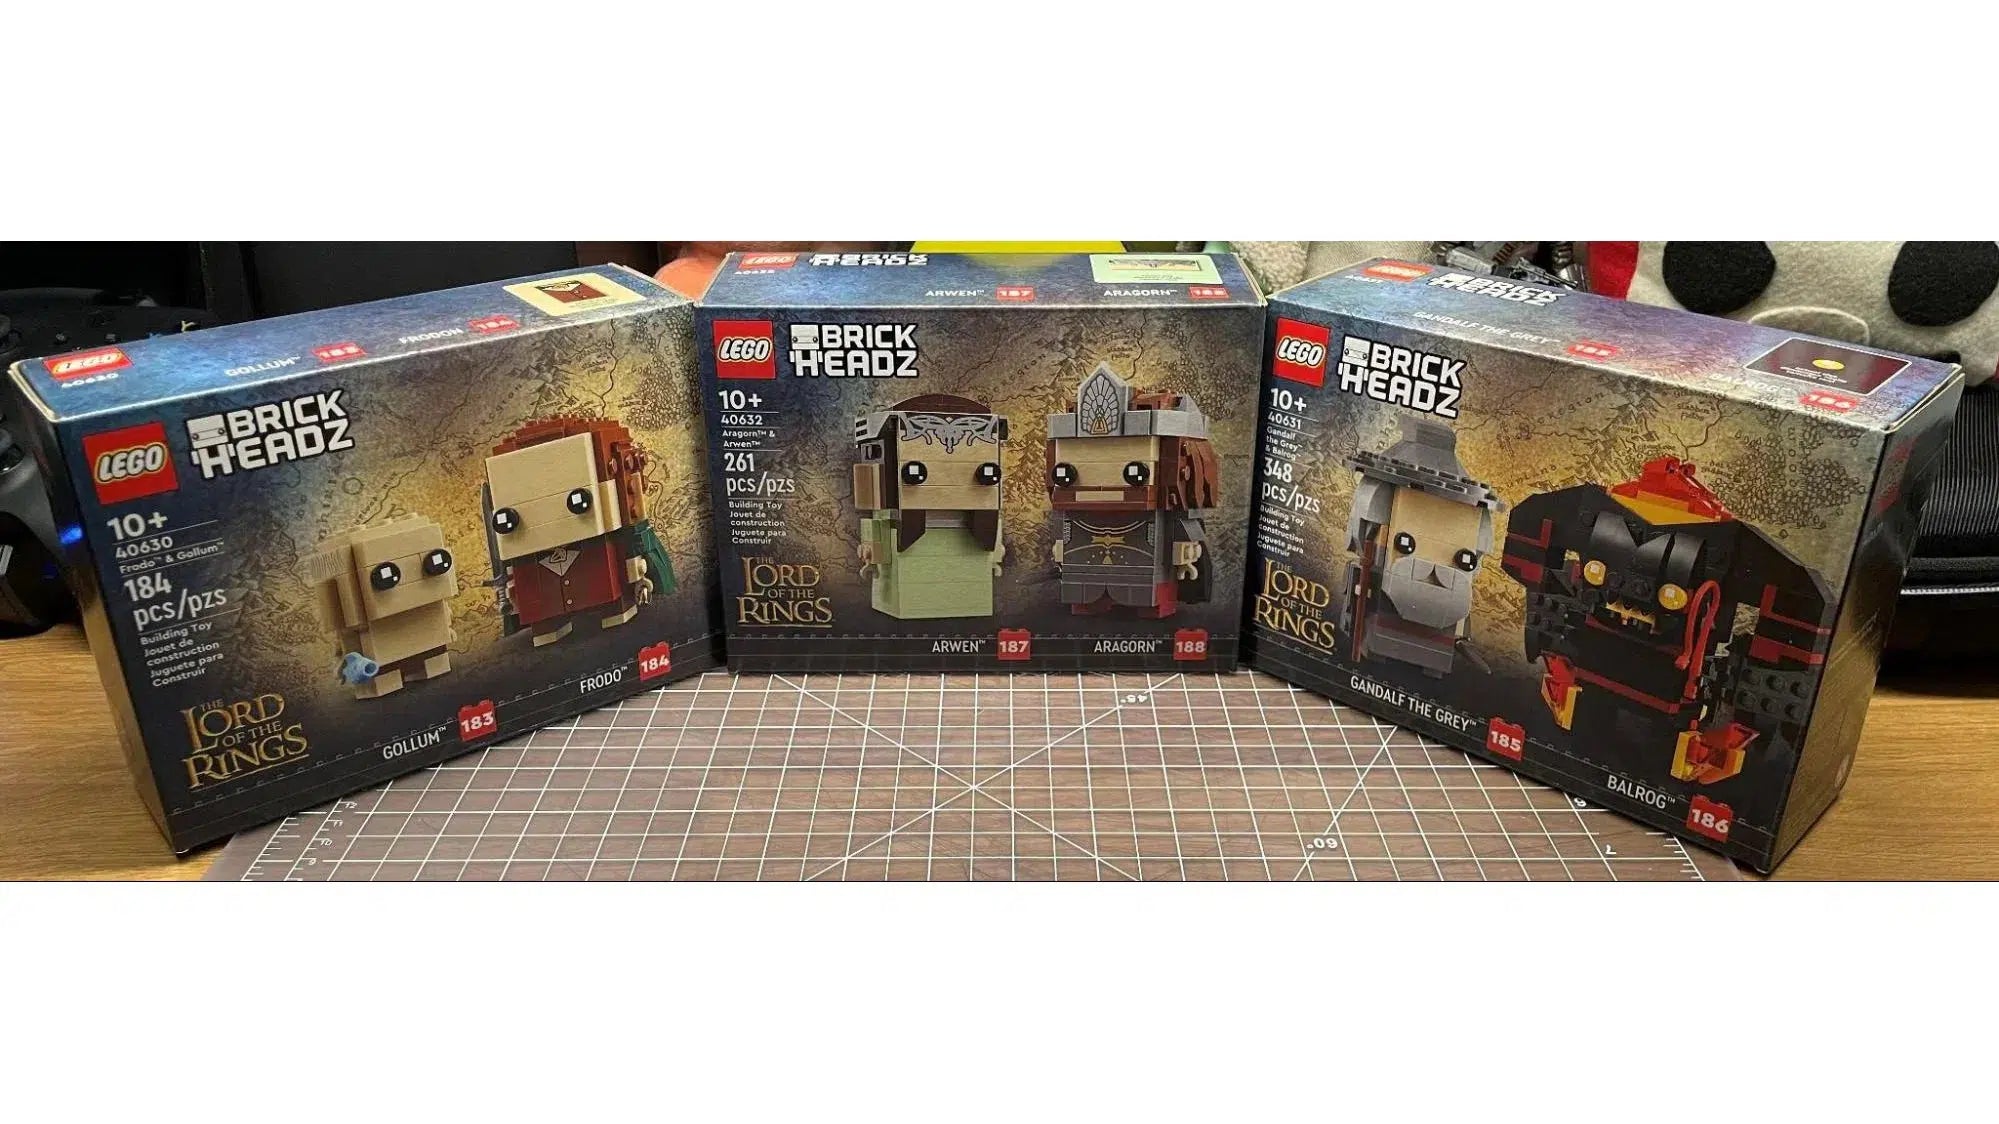 LEGO The Lord of the Rings BrickHeadz Build, Unboxing & Review